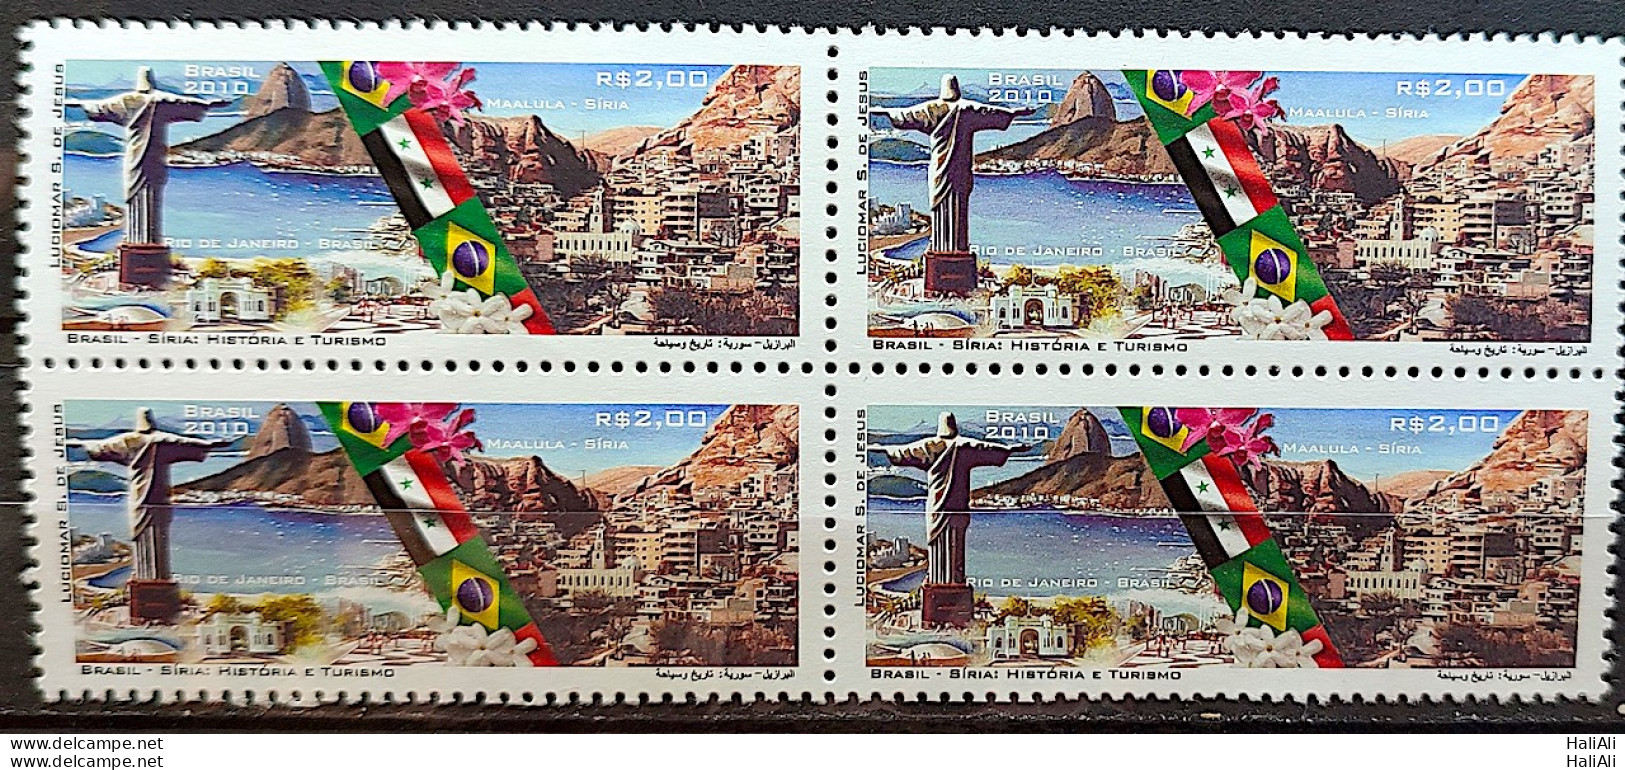 C 2983 Brazil Stamp Diplomatic Relations Syria Christ The Redeemer RJ Flag 2010 Block Of 4 - Nuovi